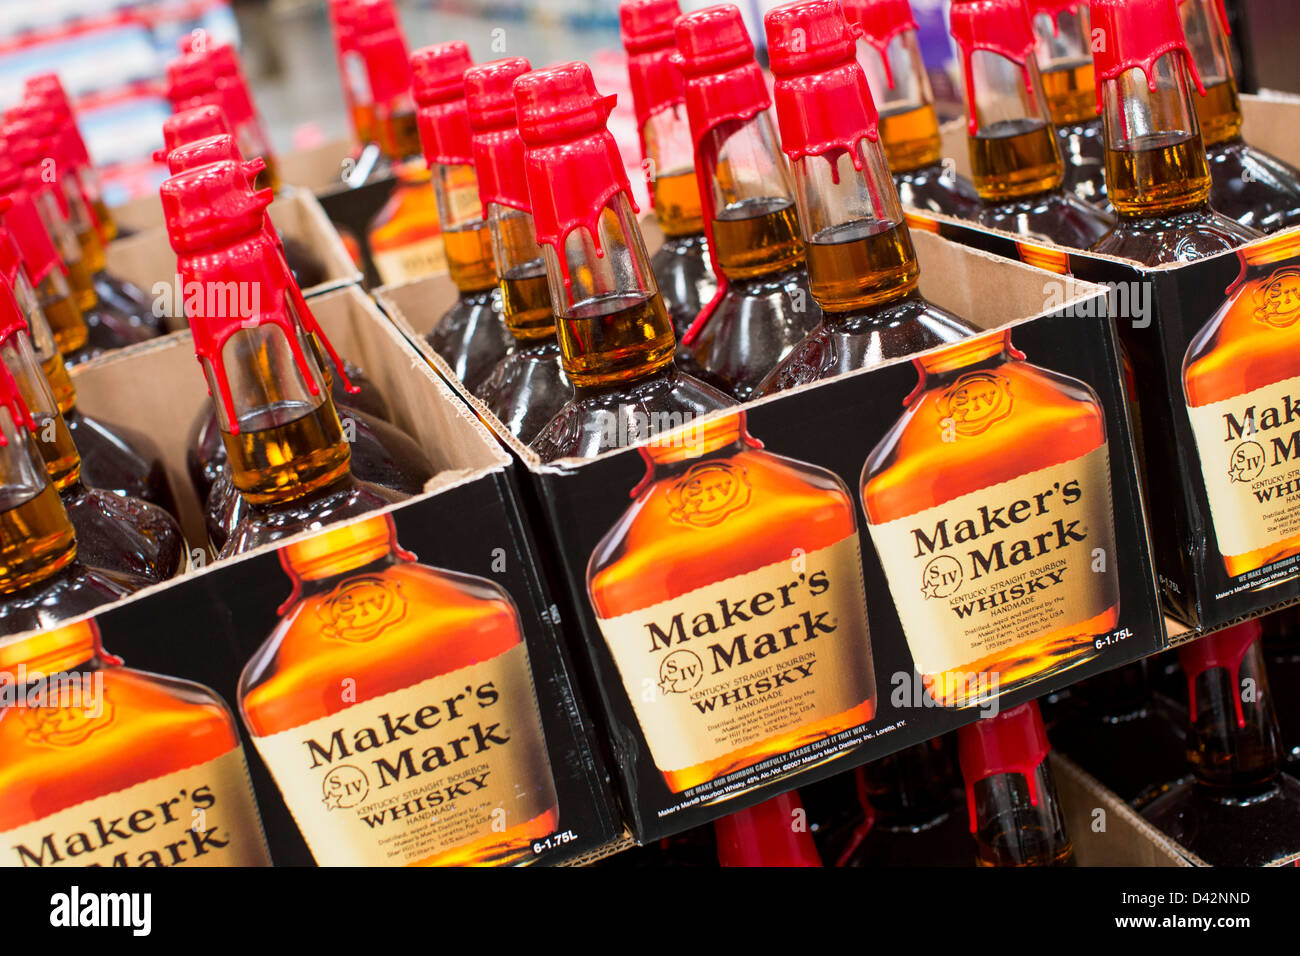 Maker's Mark whiskey on display at a Costco Wholesale Warehouse Club. Stock Photo